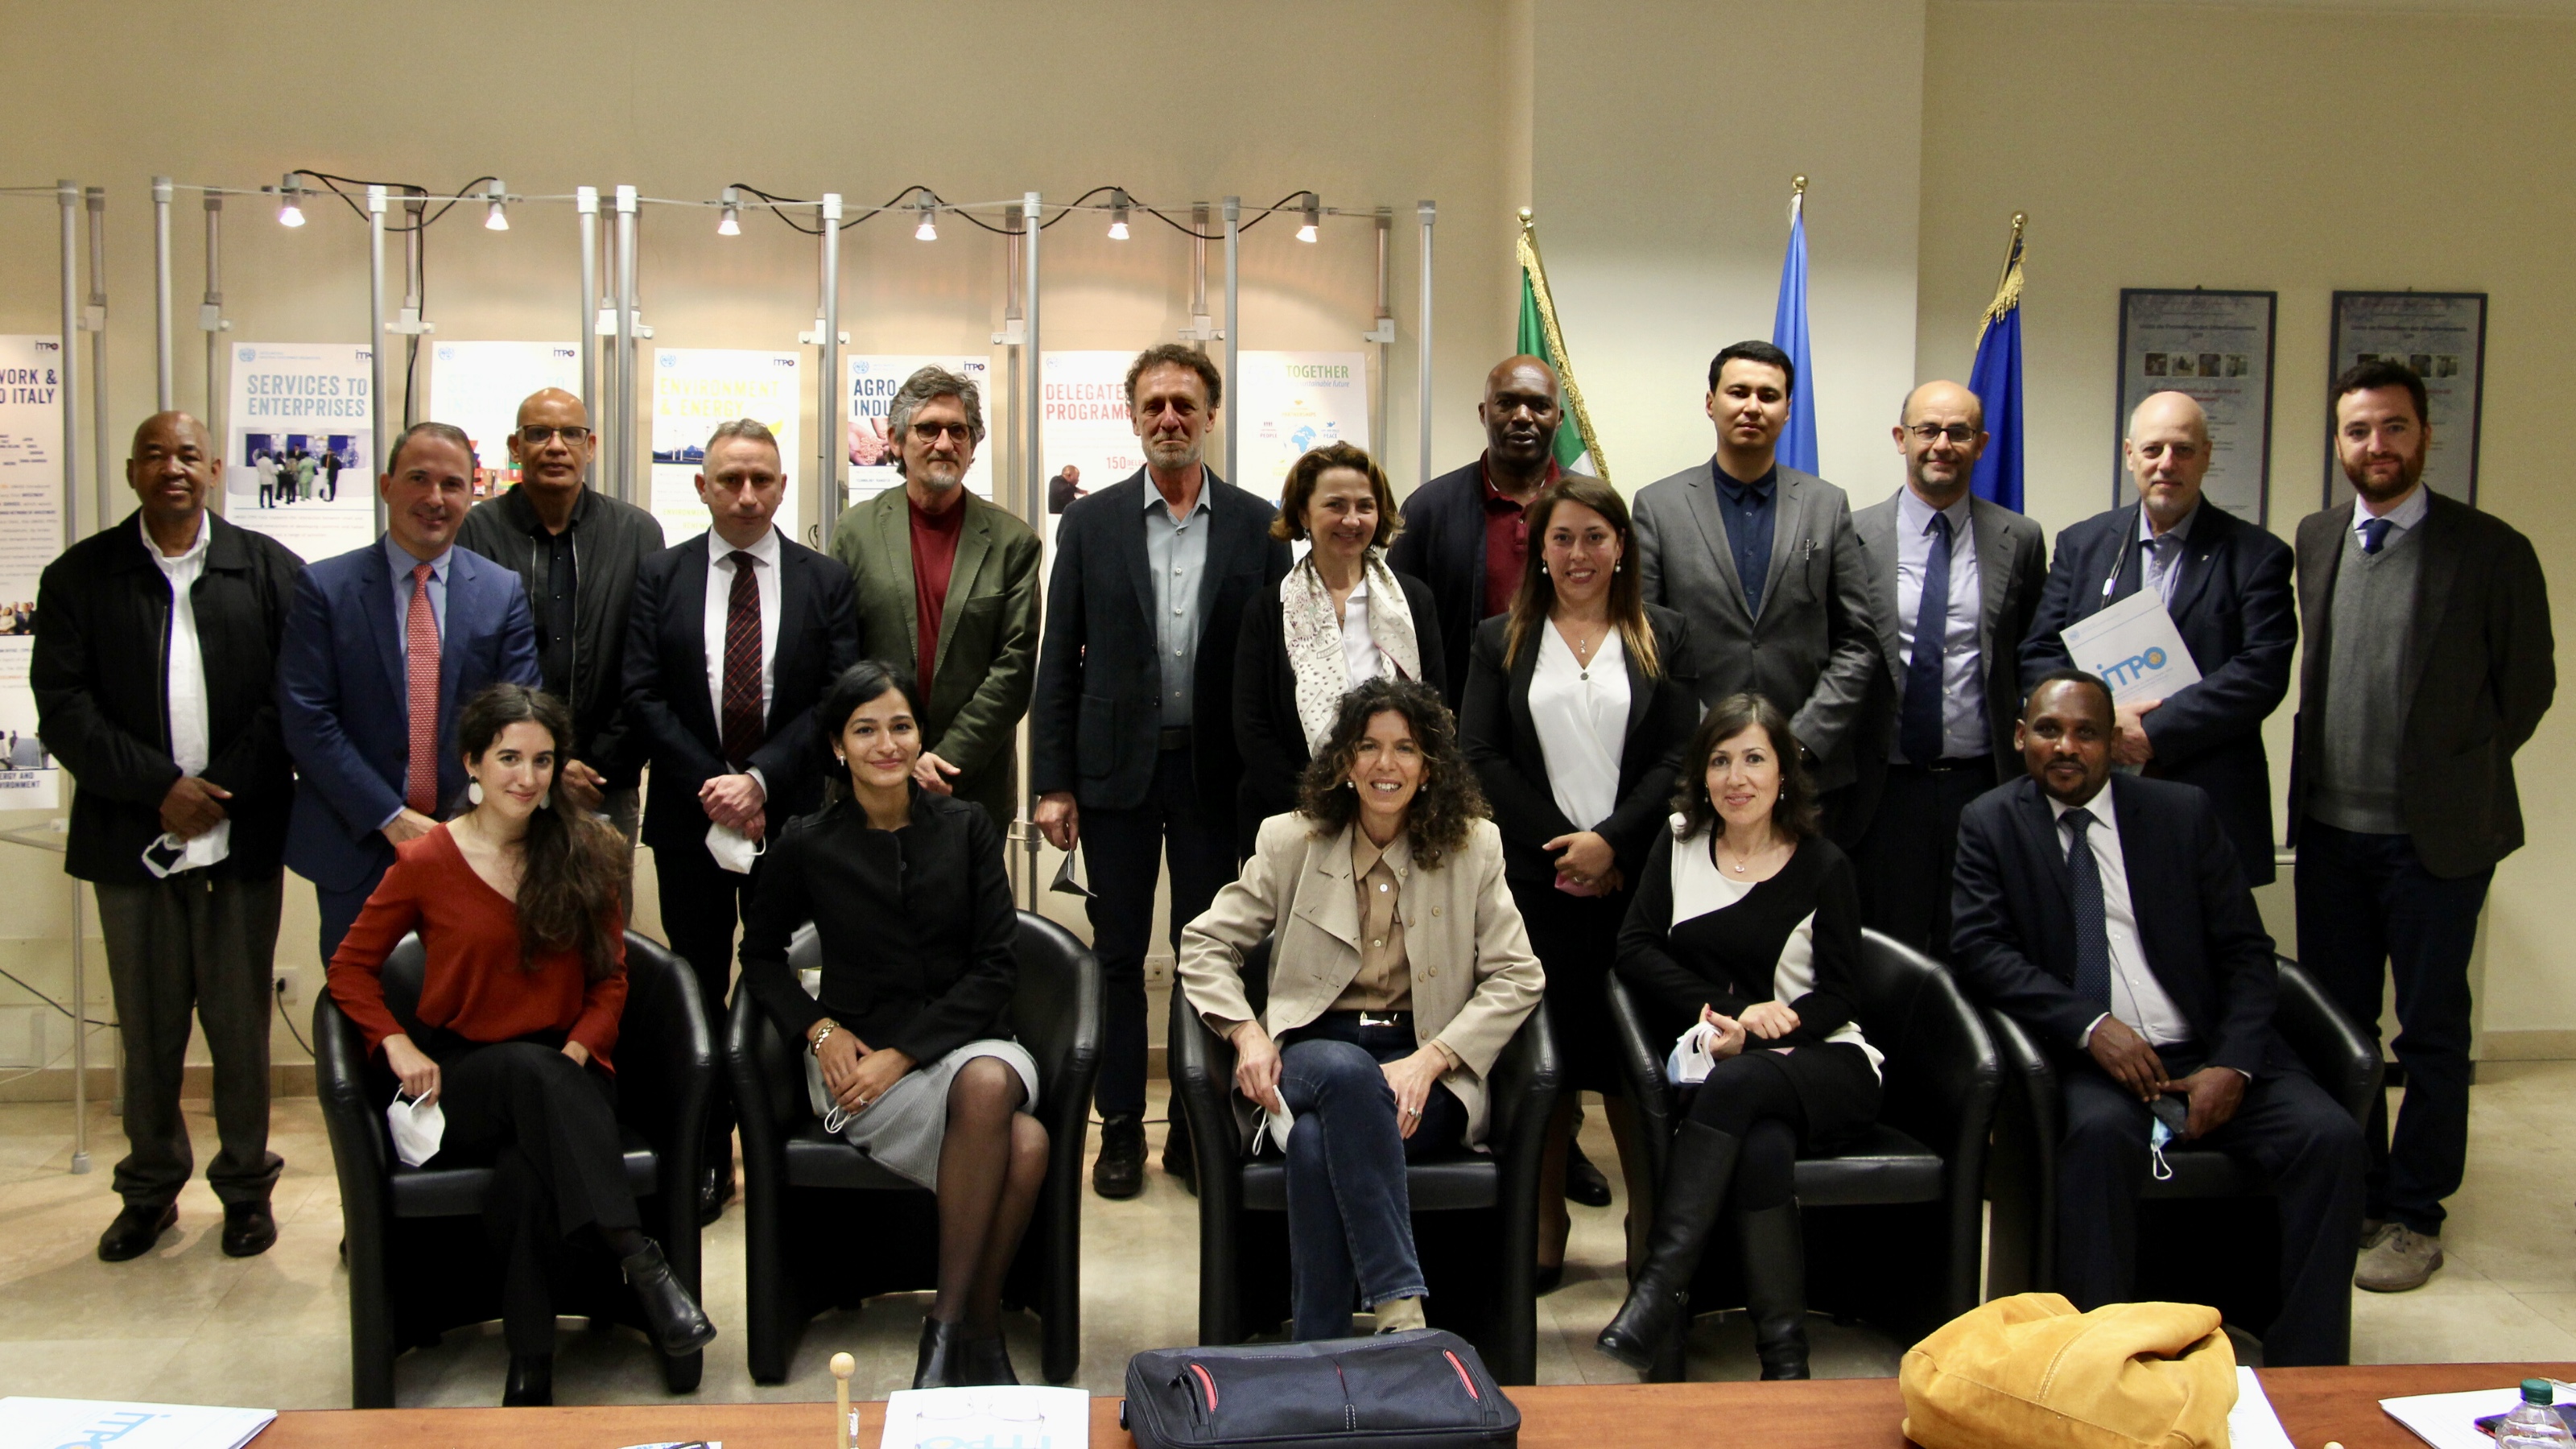 FIPEE meeting at UNIDO ITPO Italy with the Italian Ministry of Ecological Transition and institutional country counterparts